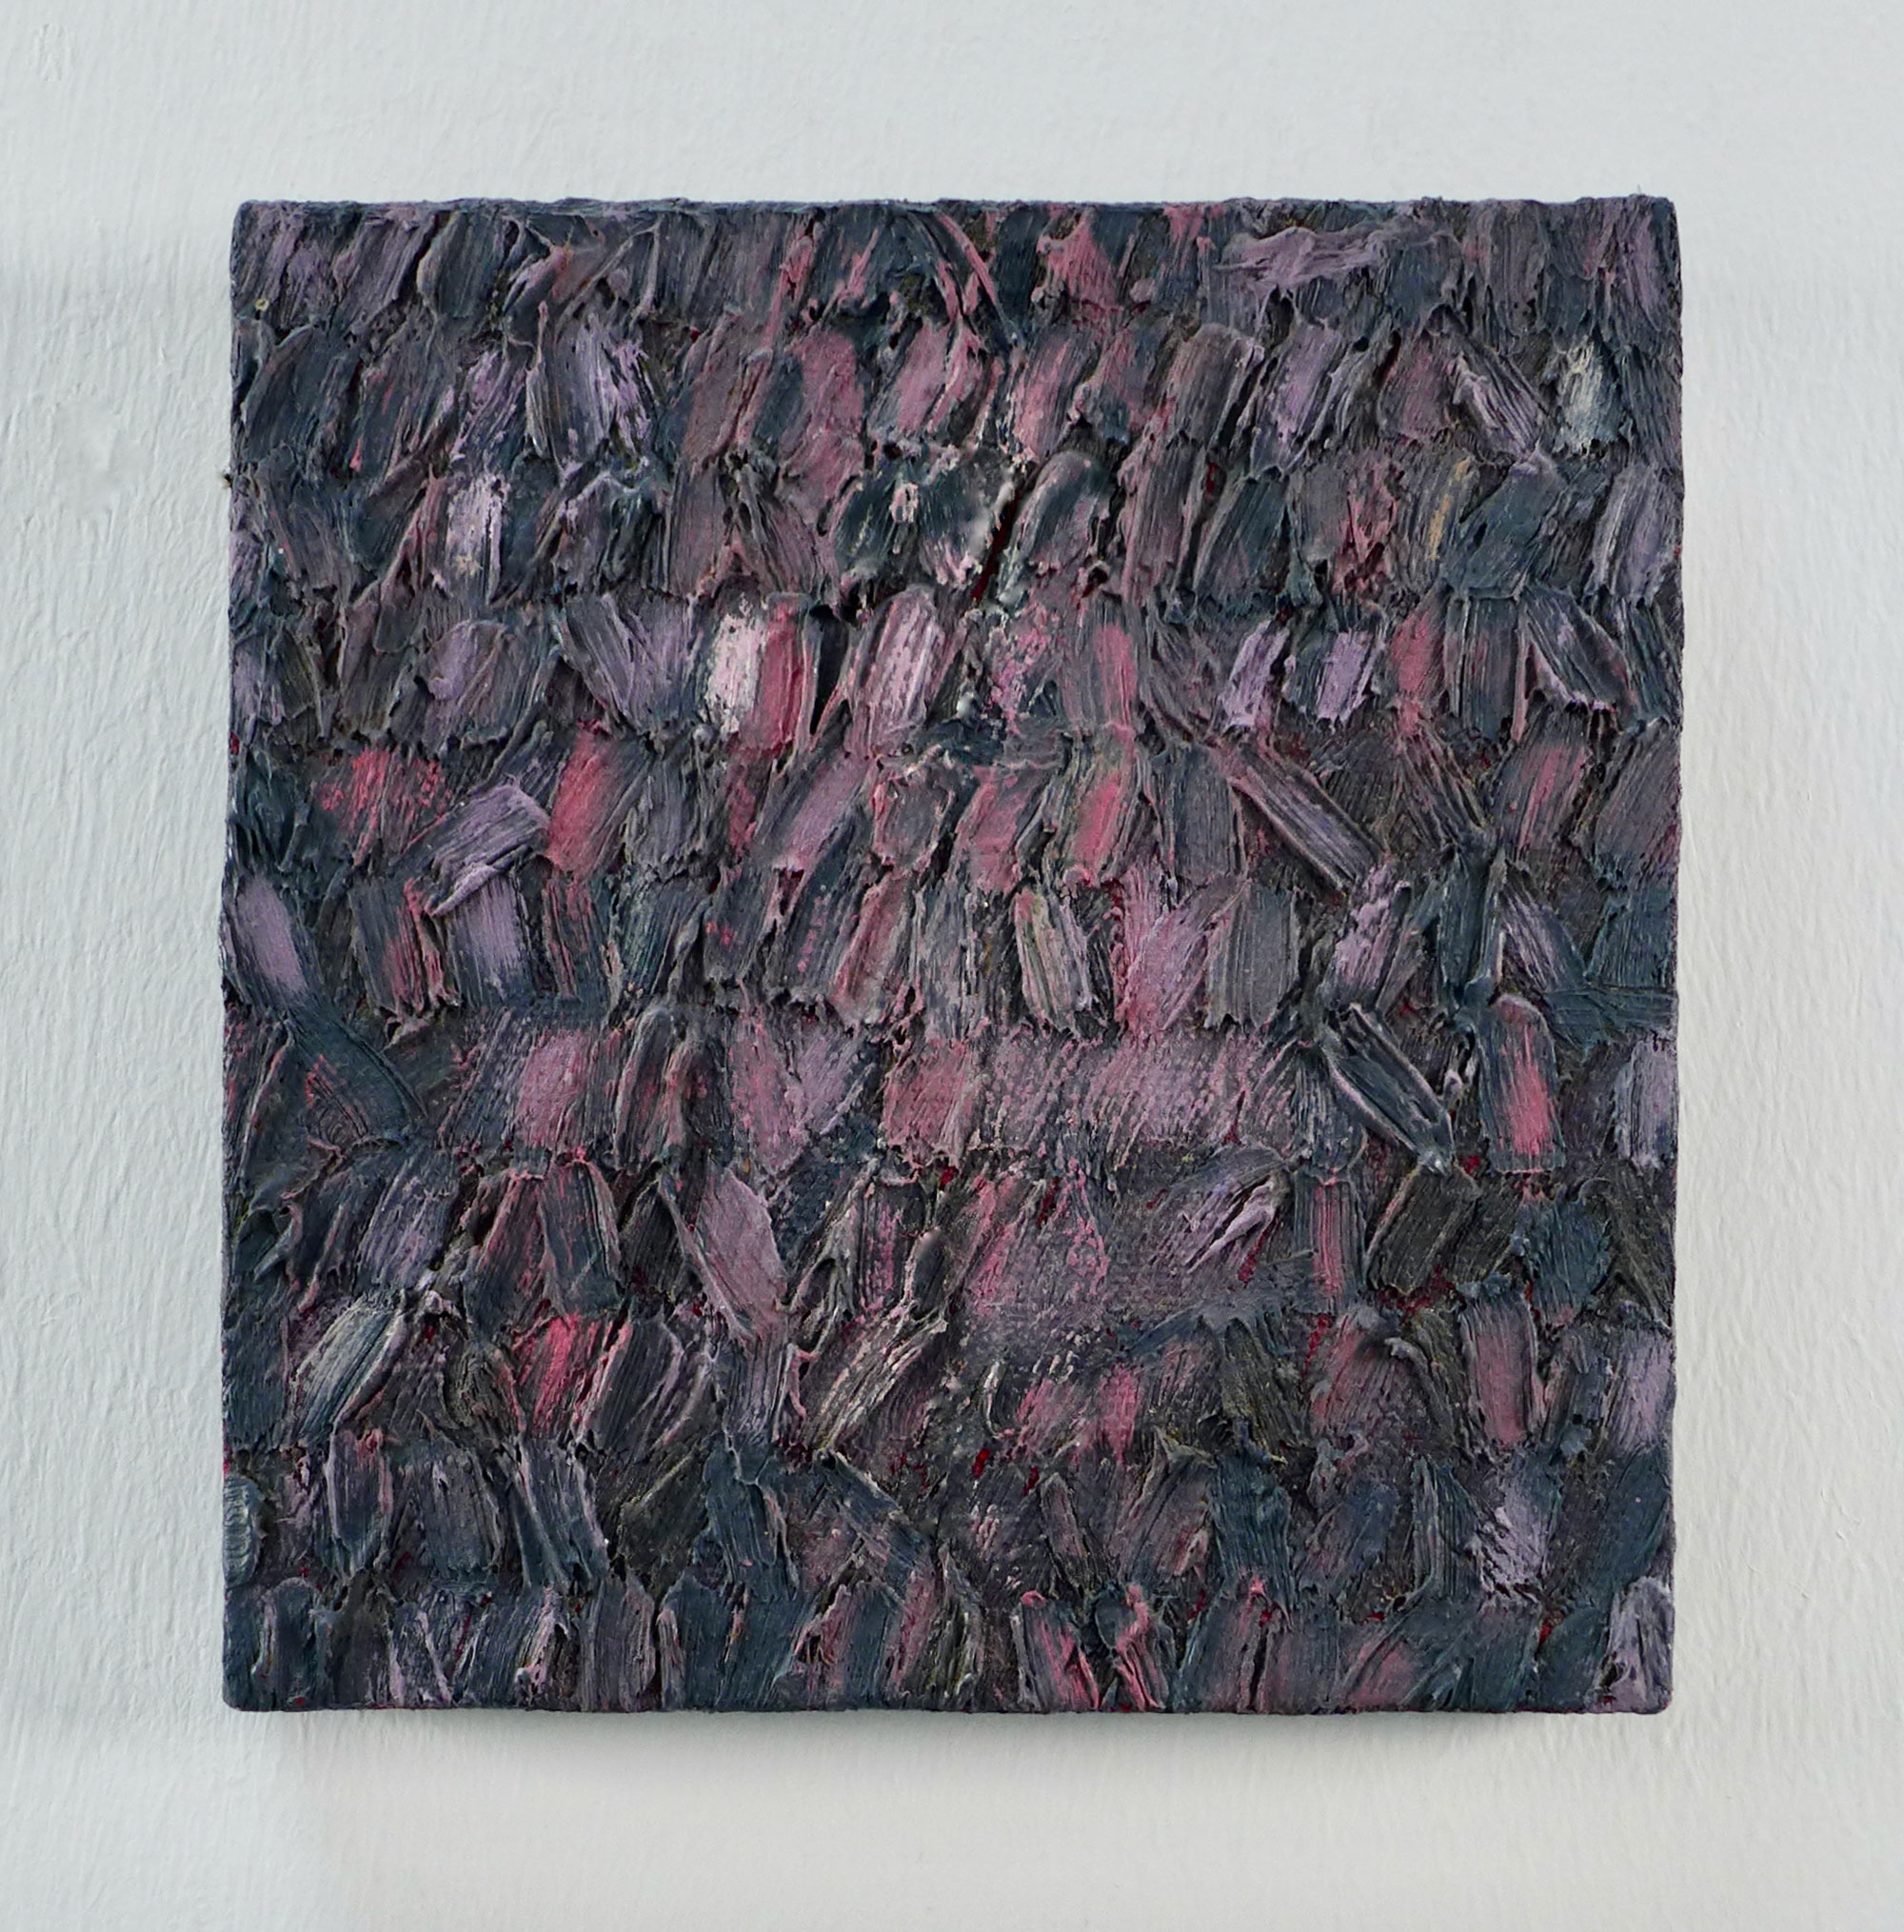 Kenneth Dingwall, Quiet Front, 1980, oil and wax on wood, 13.5cm x 13.5cm